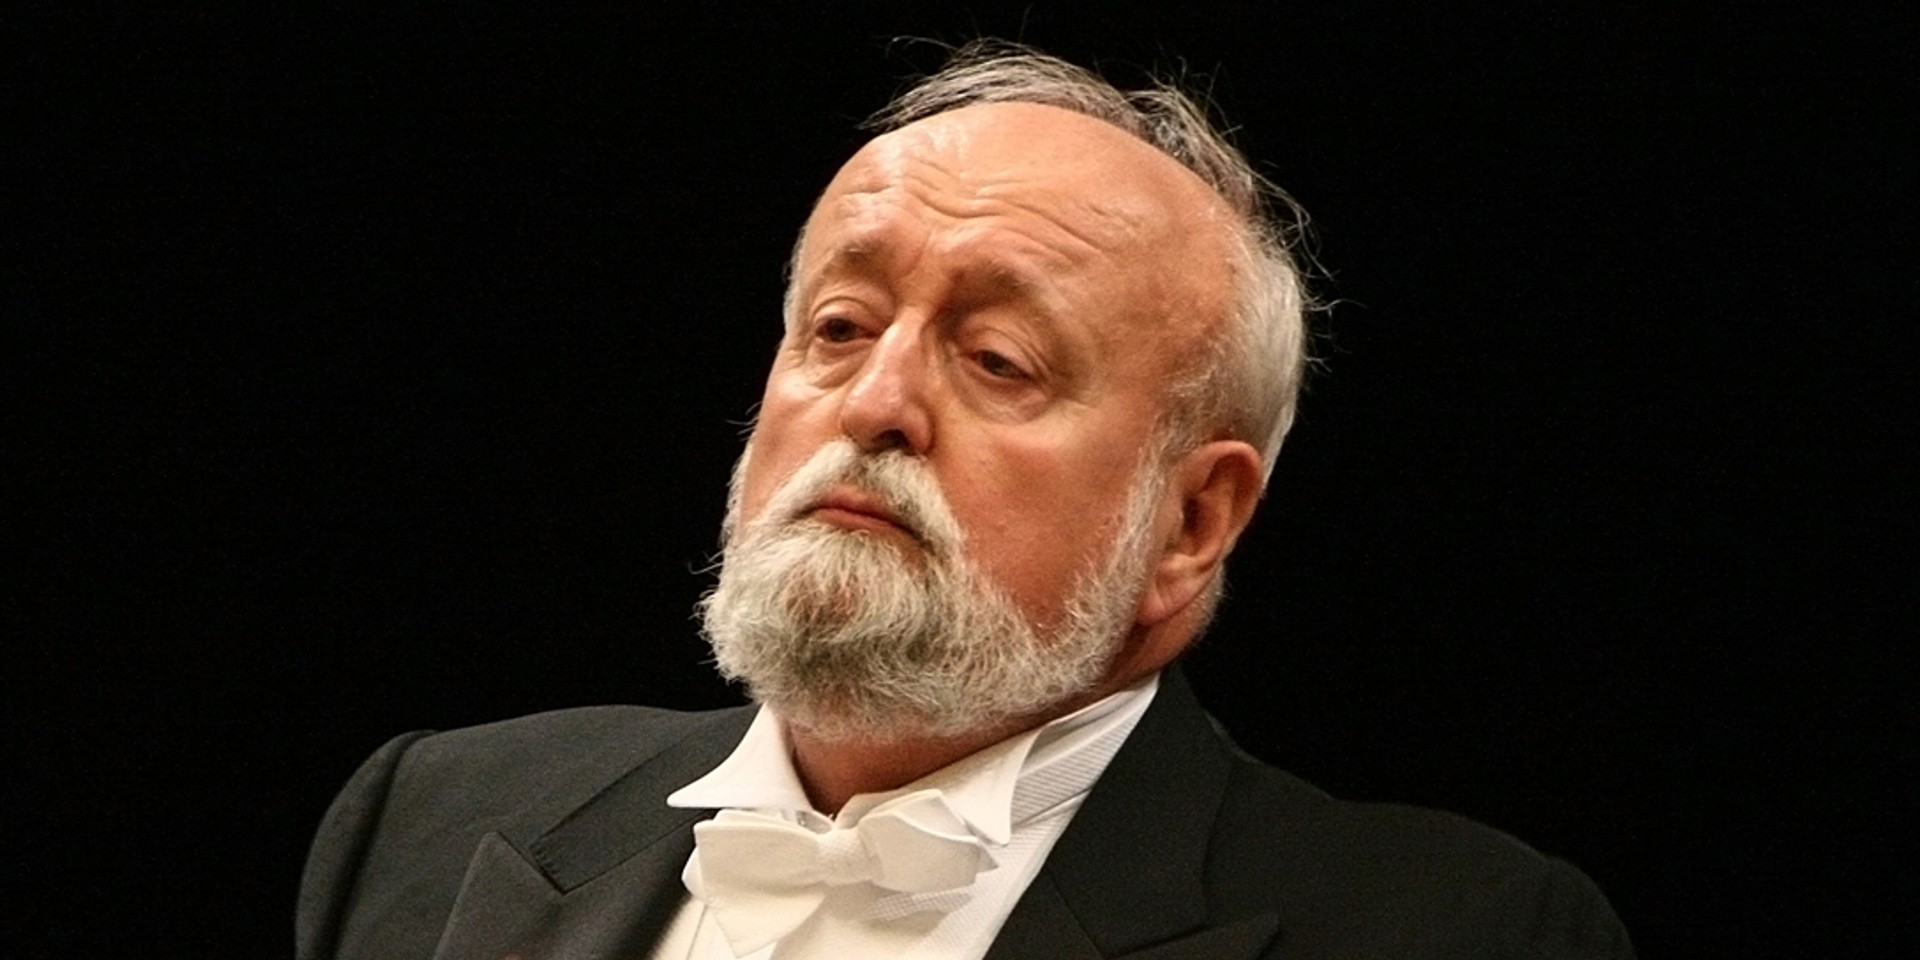 Remembering Krzysztof Penderecki, the man behind the music in The Shining and Twin Peaks